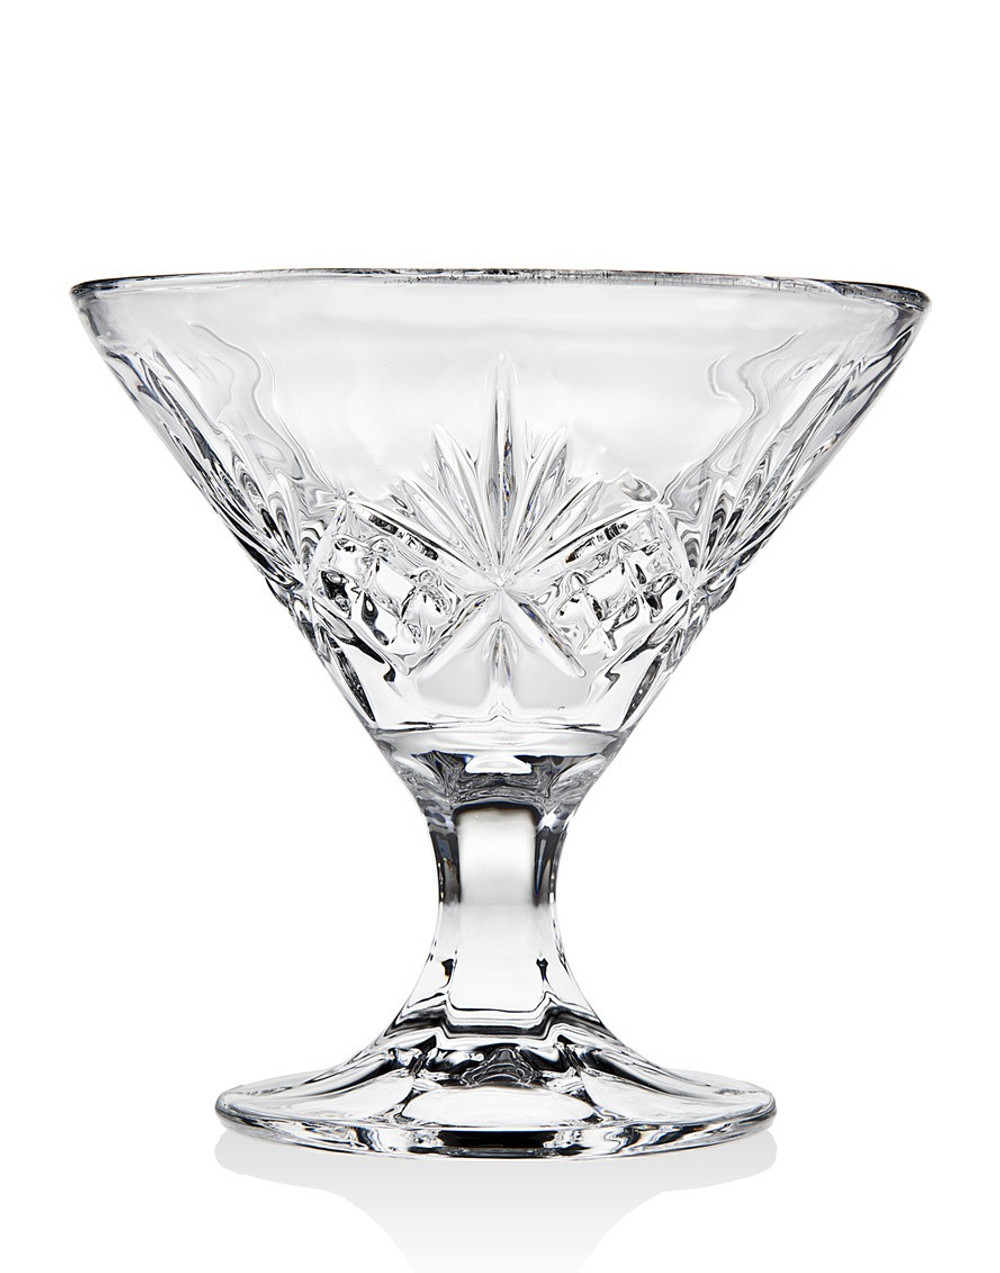 Godinger Bling Martini Glass and Matching Items & Matching Items